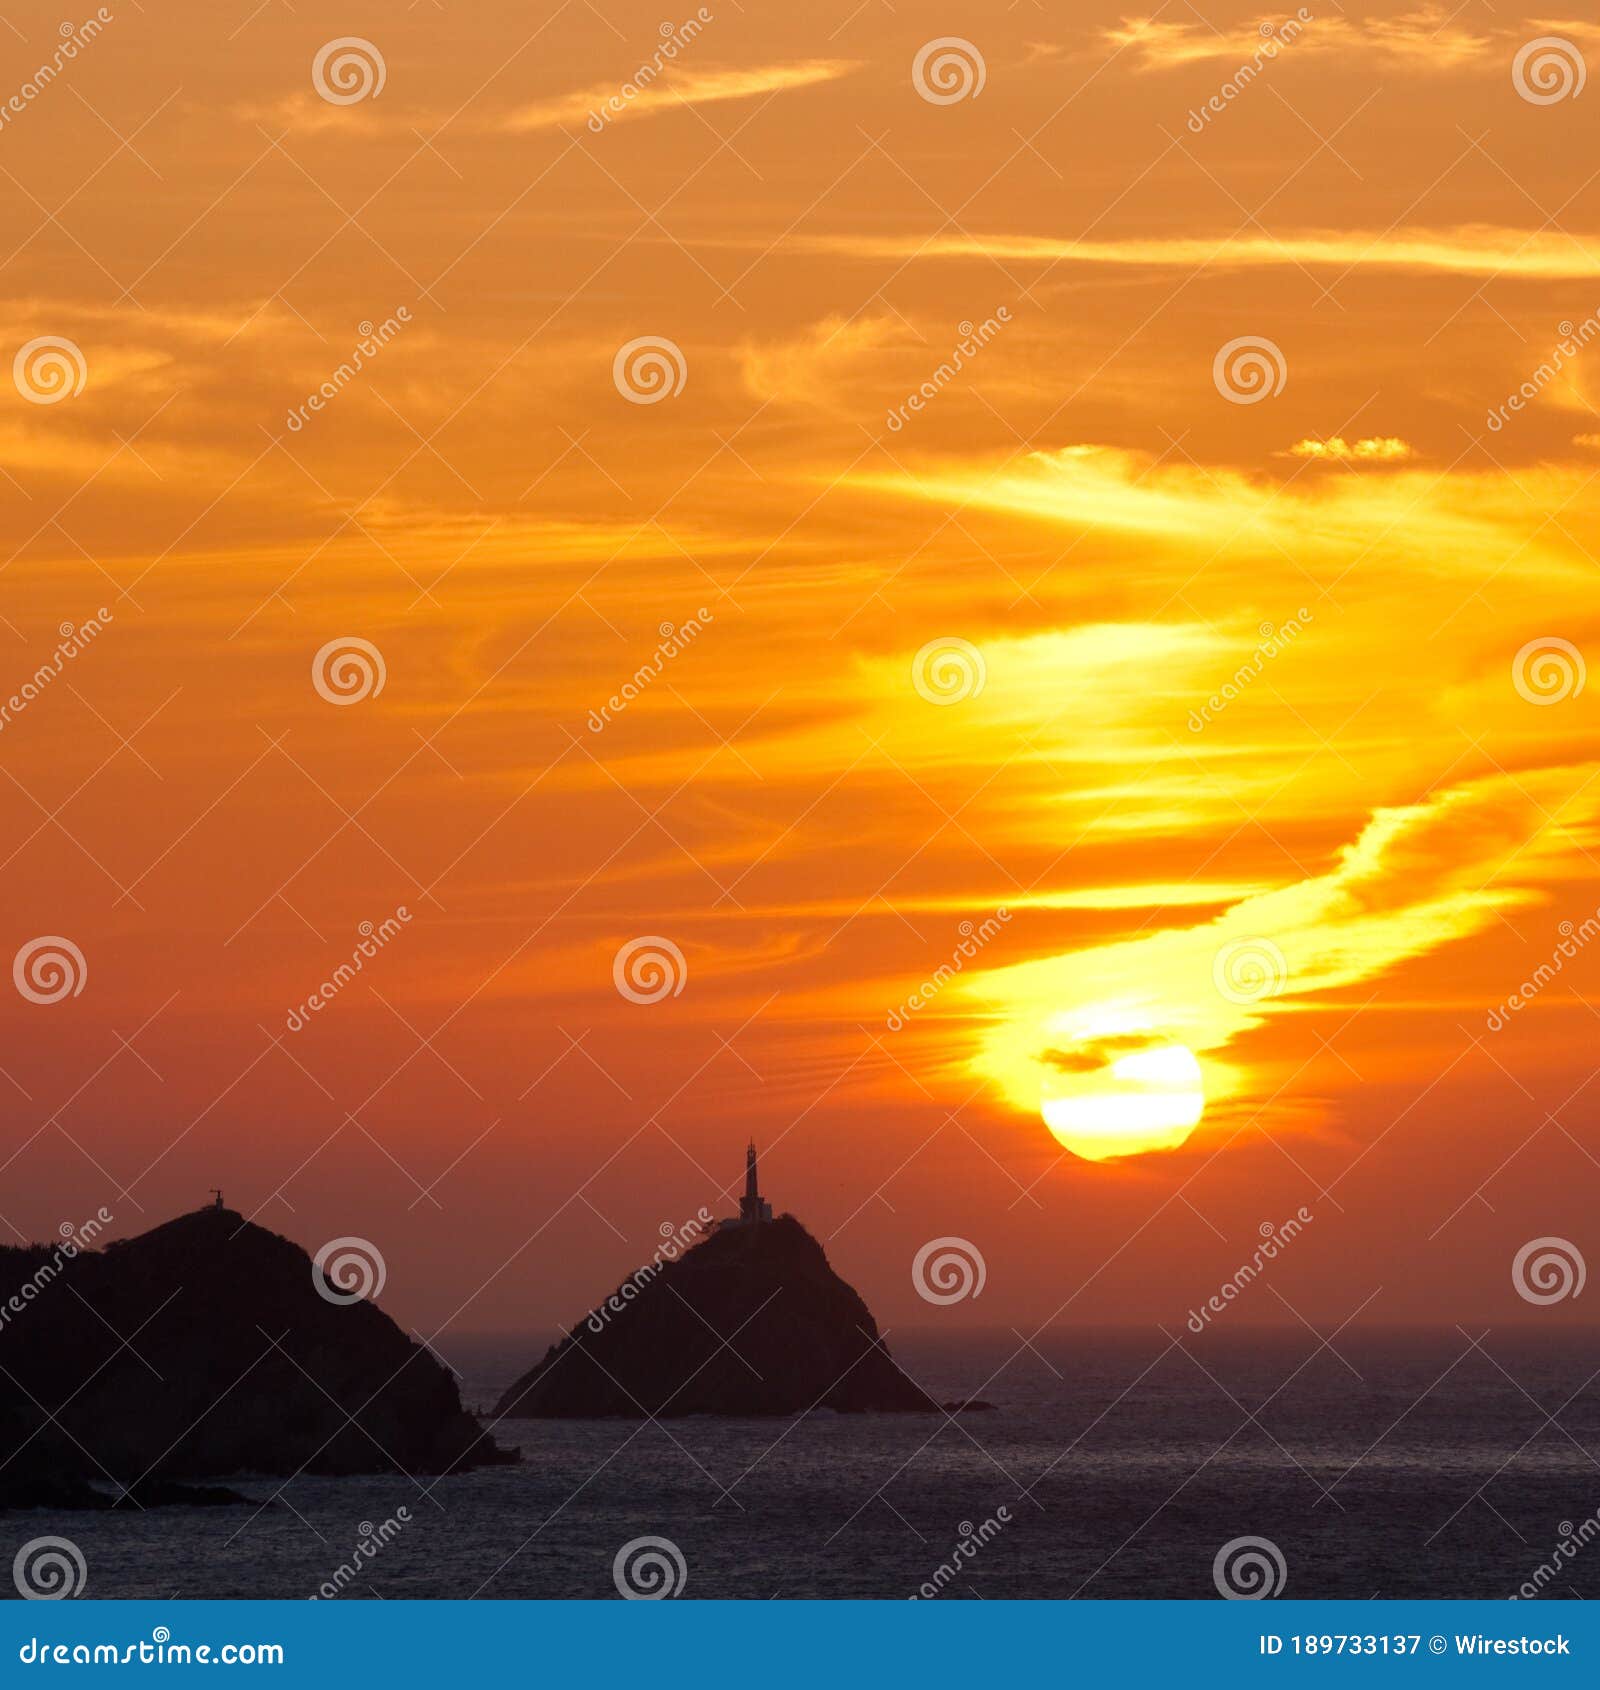 breathtaking sunset scenery with the golden sky over taganga, colombia